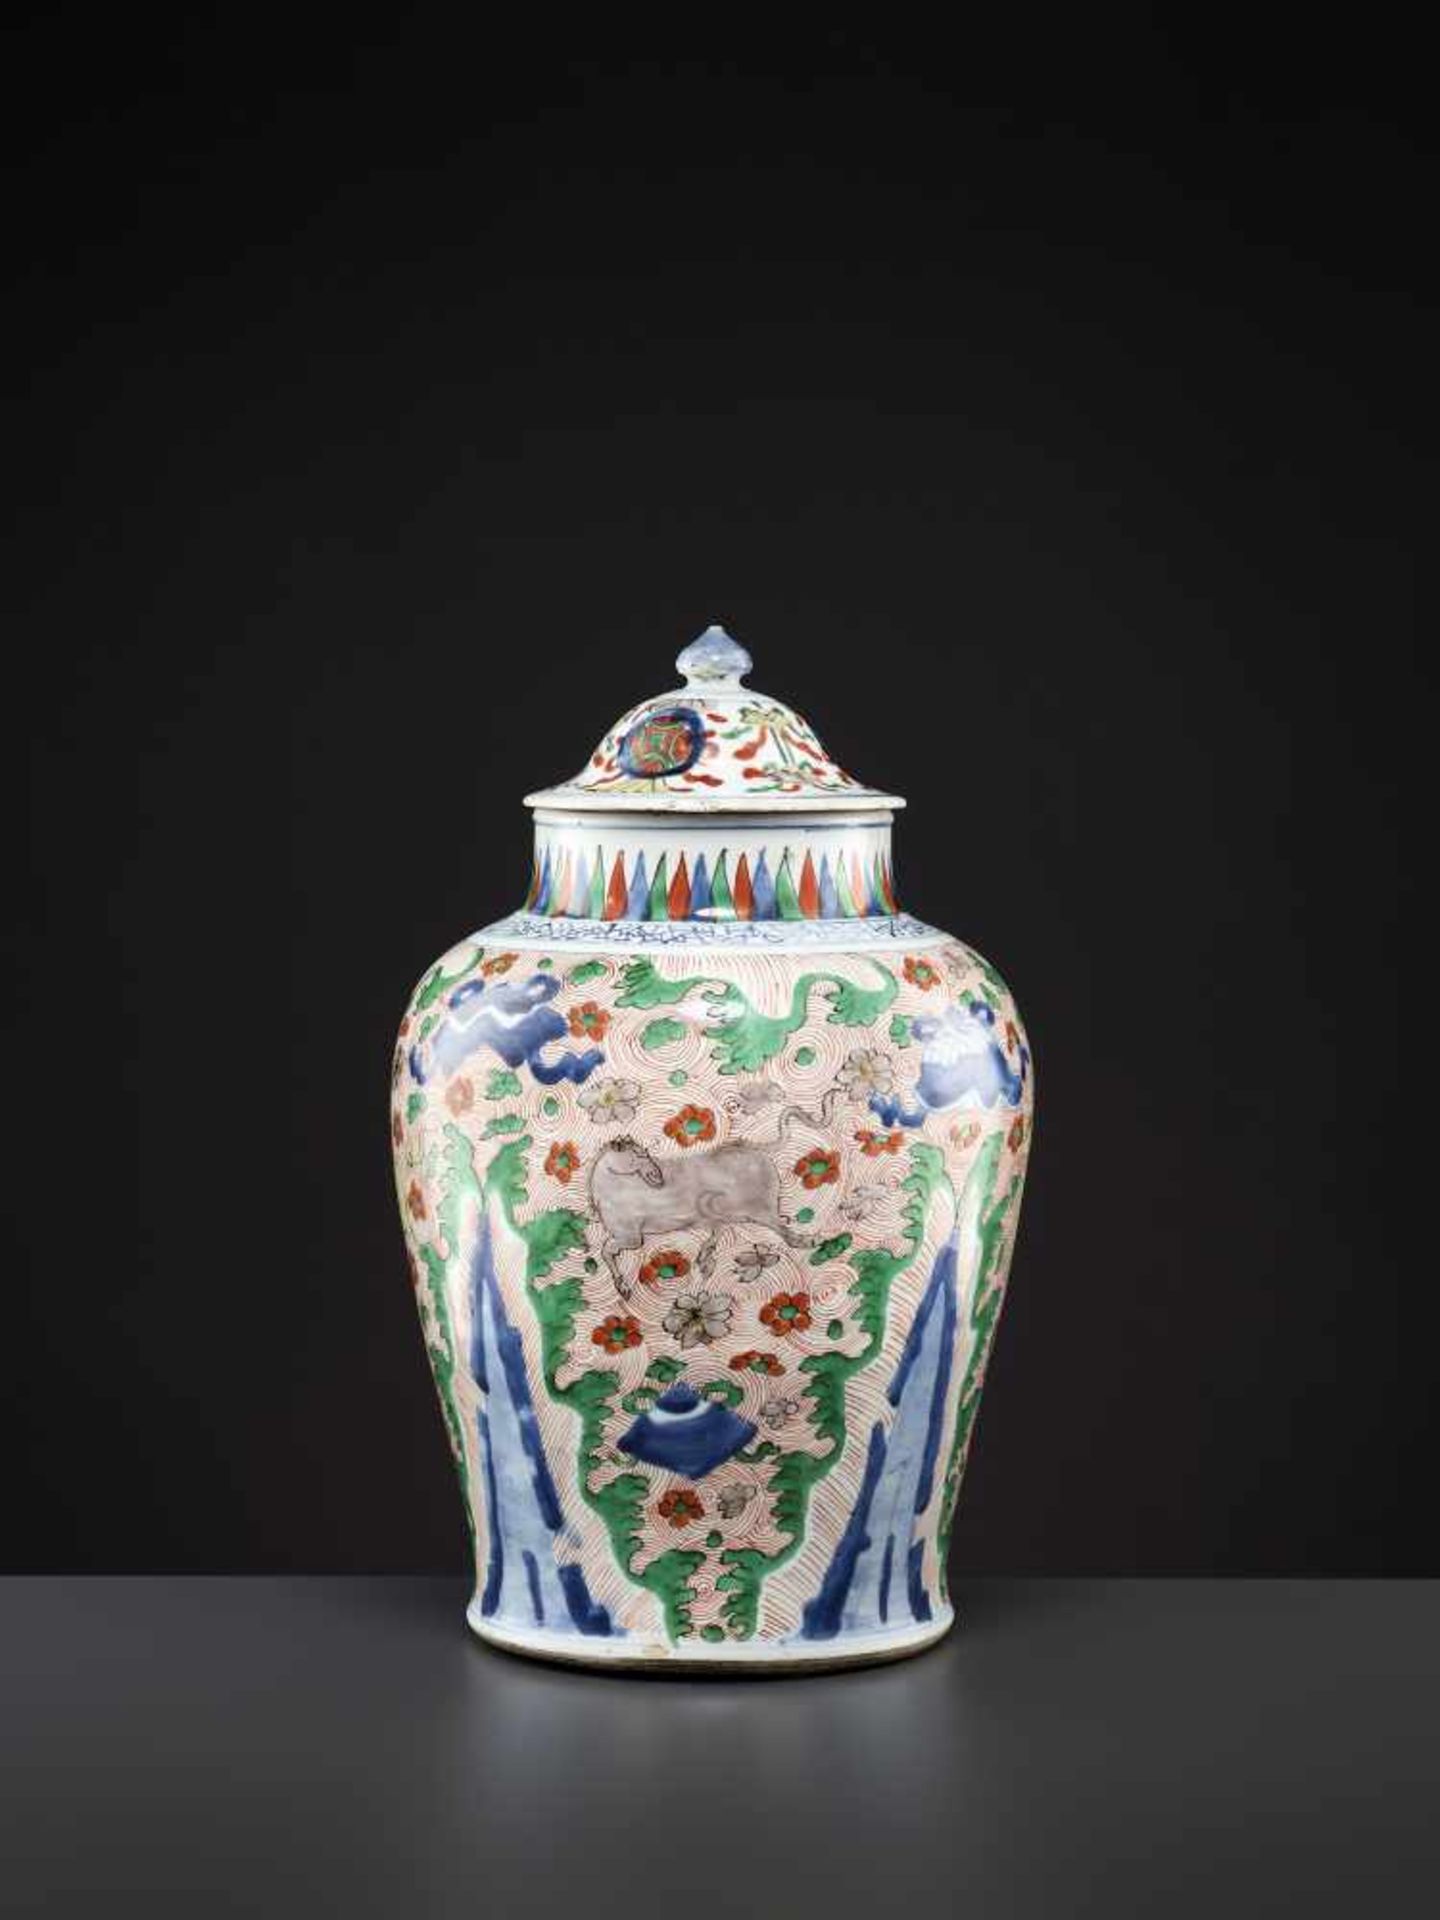 A LIDDED WUCAI VASE, MING DYNASTY China, 16th - 17th century. Freely painted in underglaze blue, - Image 6 of 9